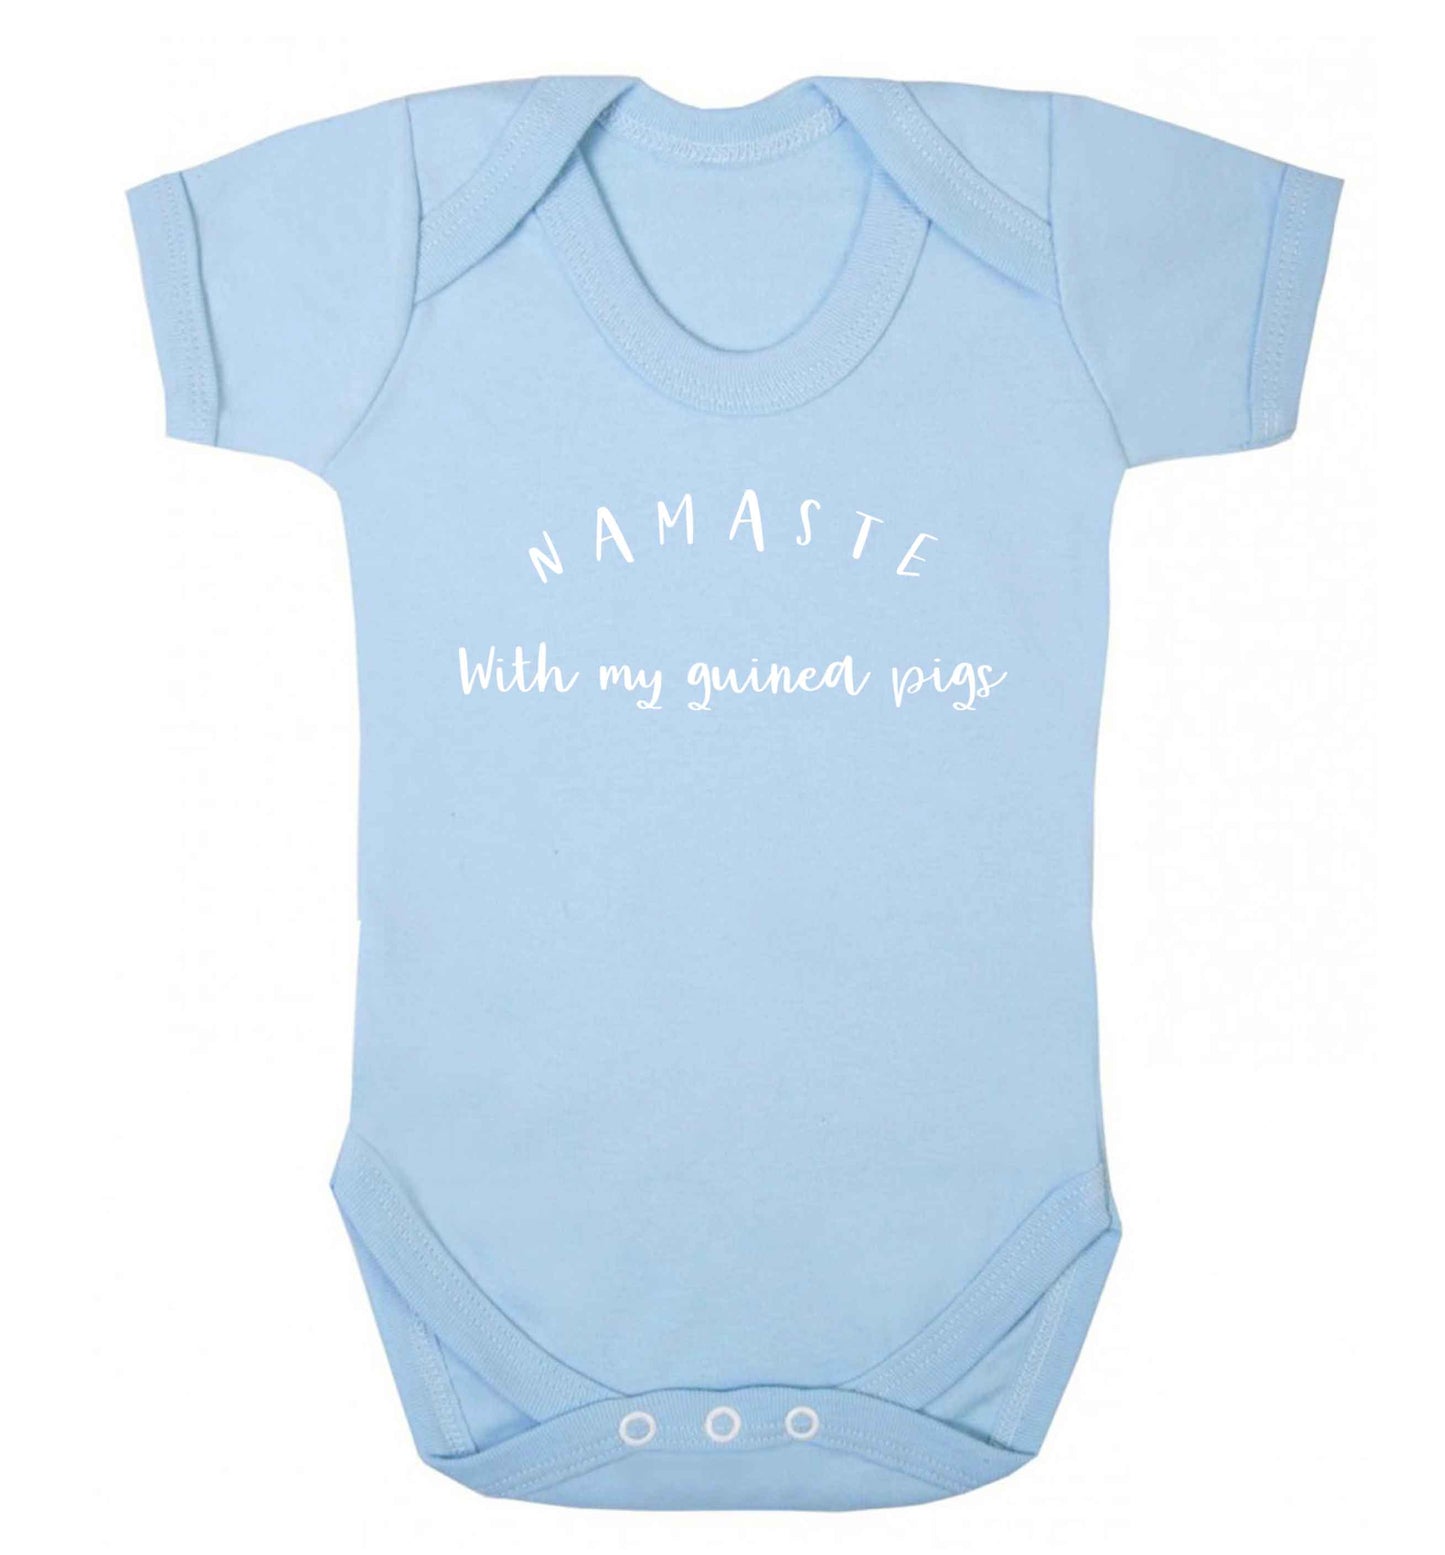 Namaste with my guinea pigs Baby Vest pale blue 18-24 months